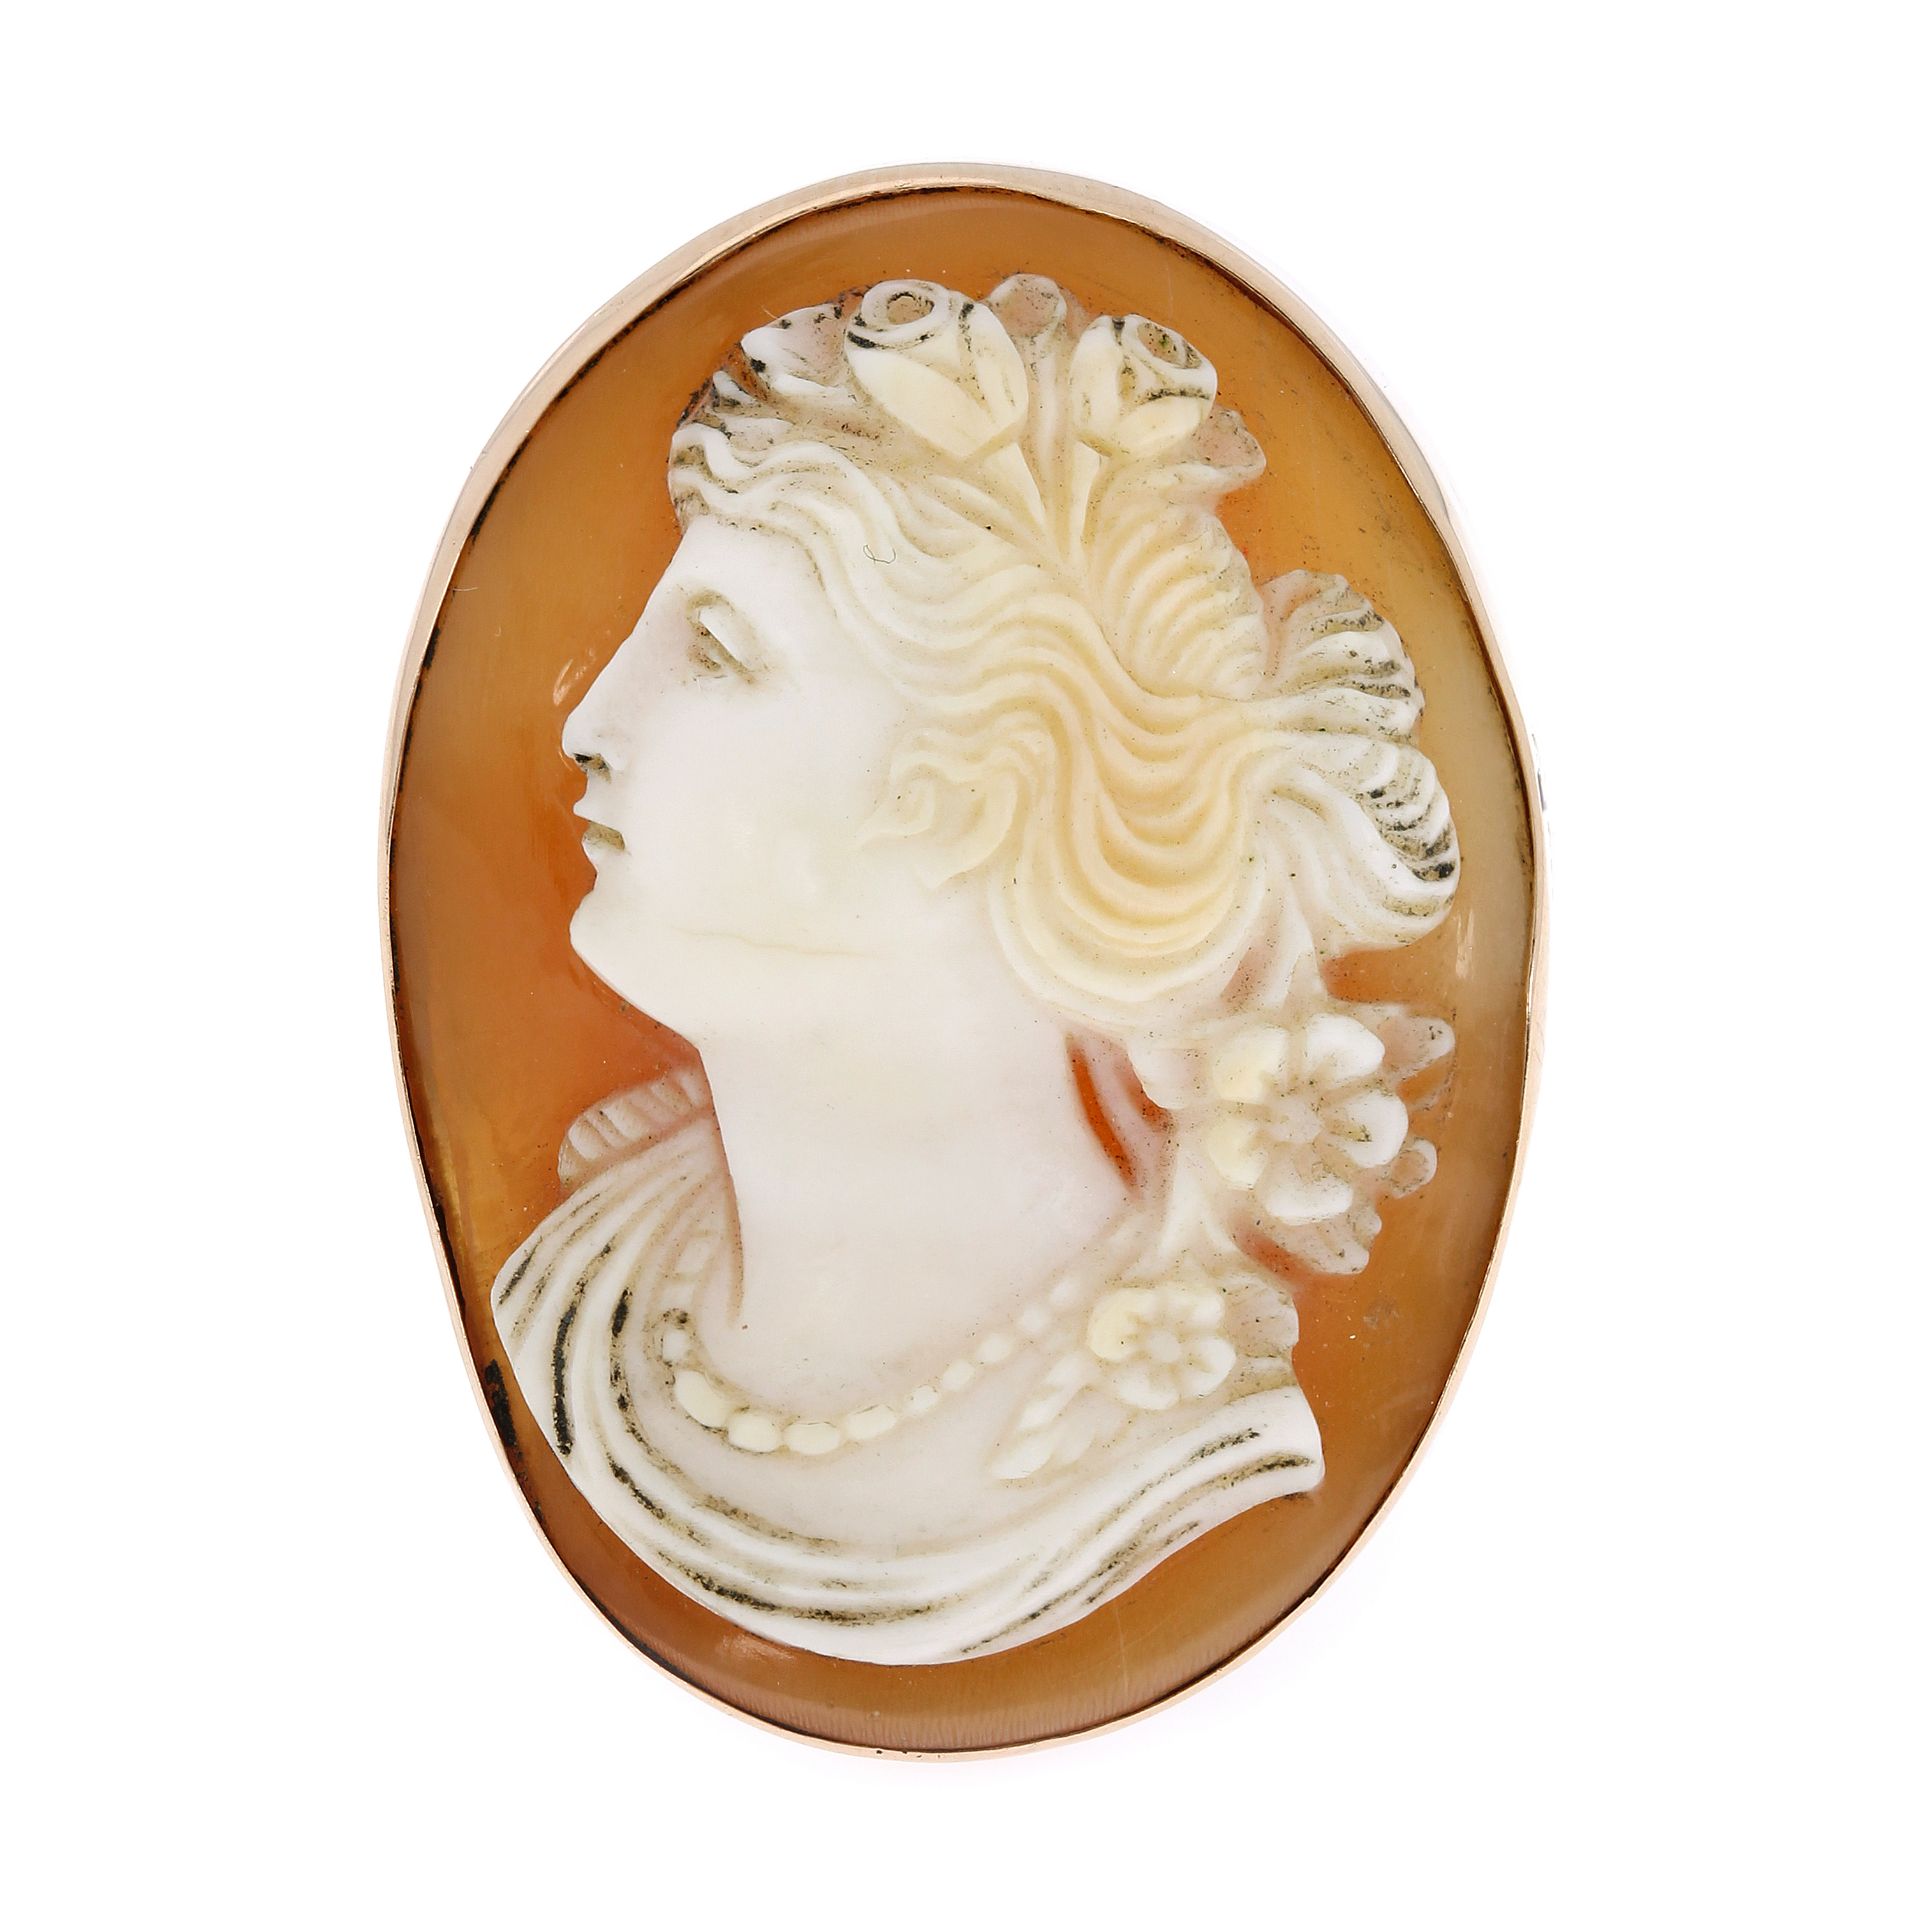 AN ANTIQUE CAMEO BROOCH in yellow gold, set with an oval carved cameo depicting the bust of a